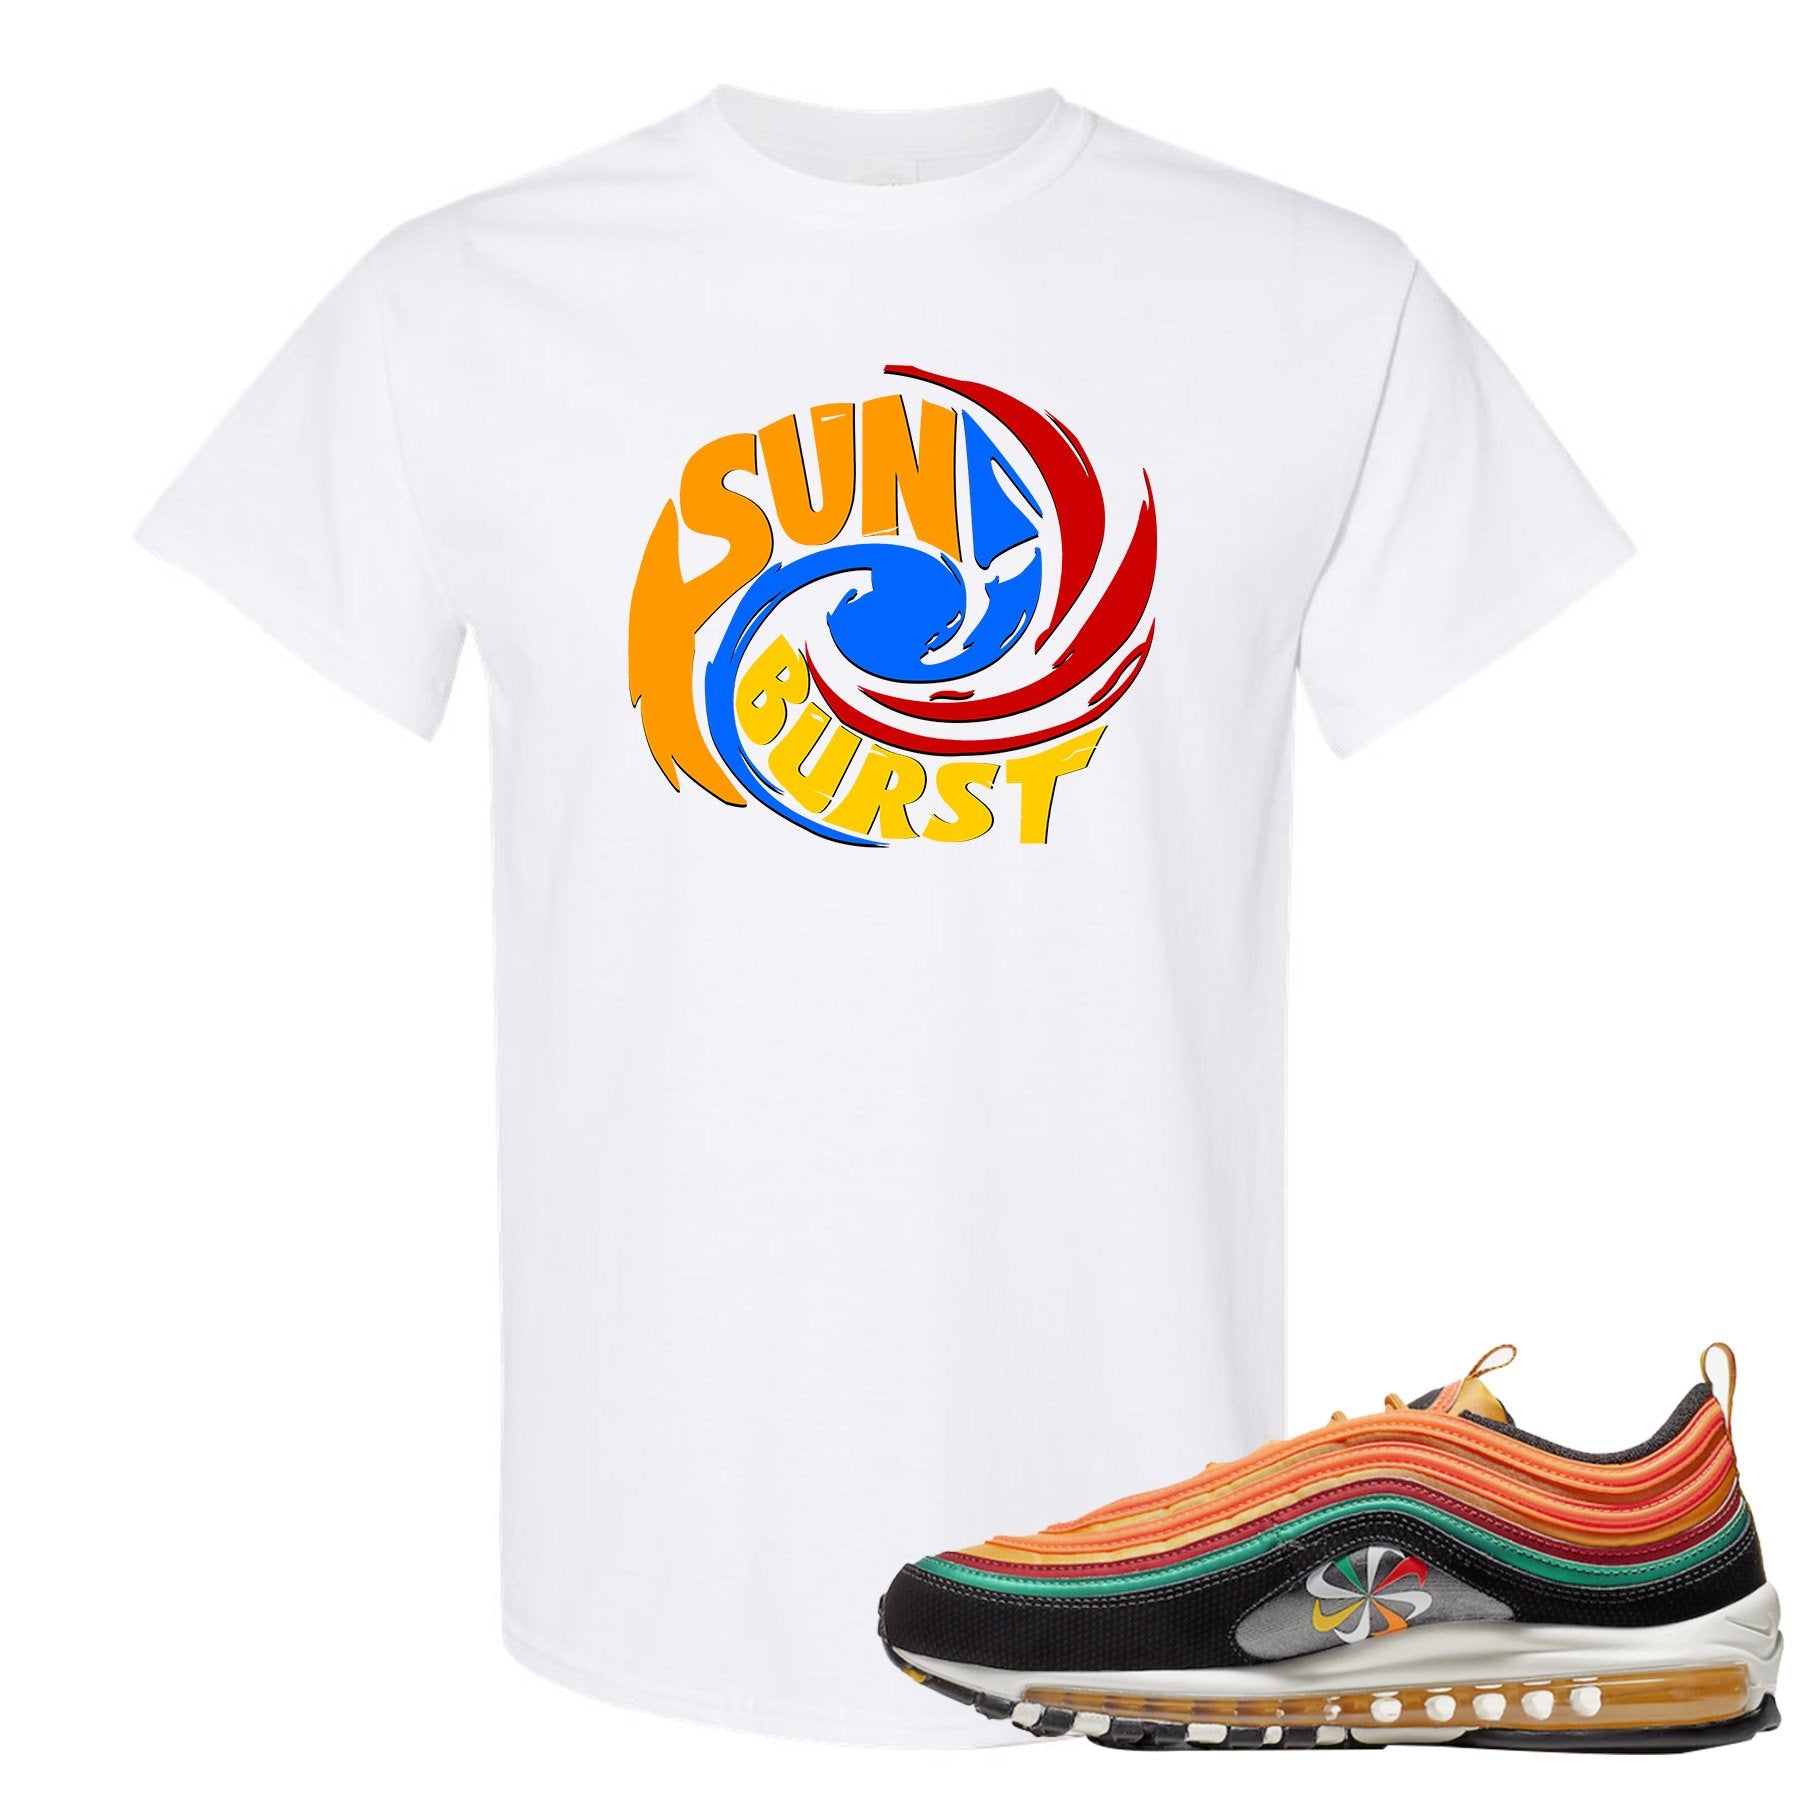 Printed on the front of the Air Max 97 sunburst white sneaker matching tee shirt is the Sunburst Hurricane logo